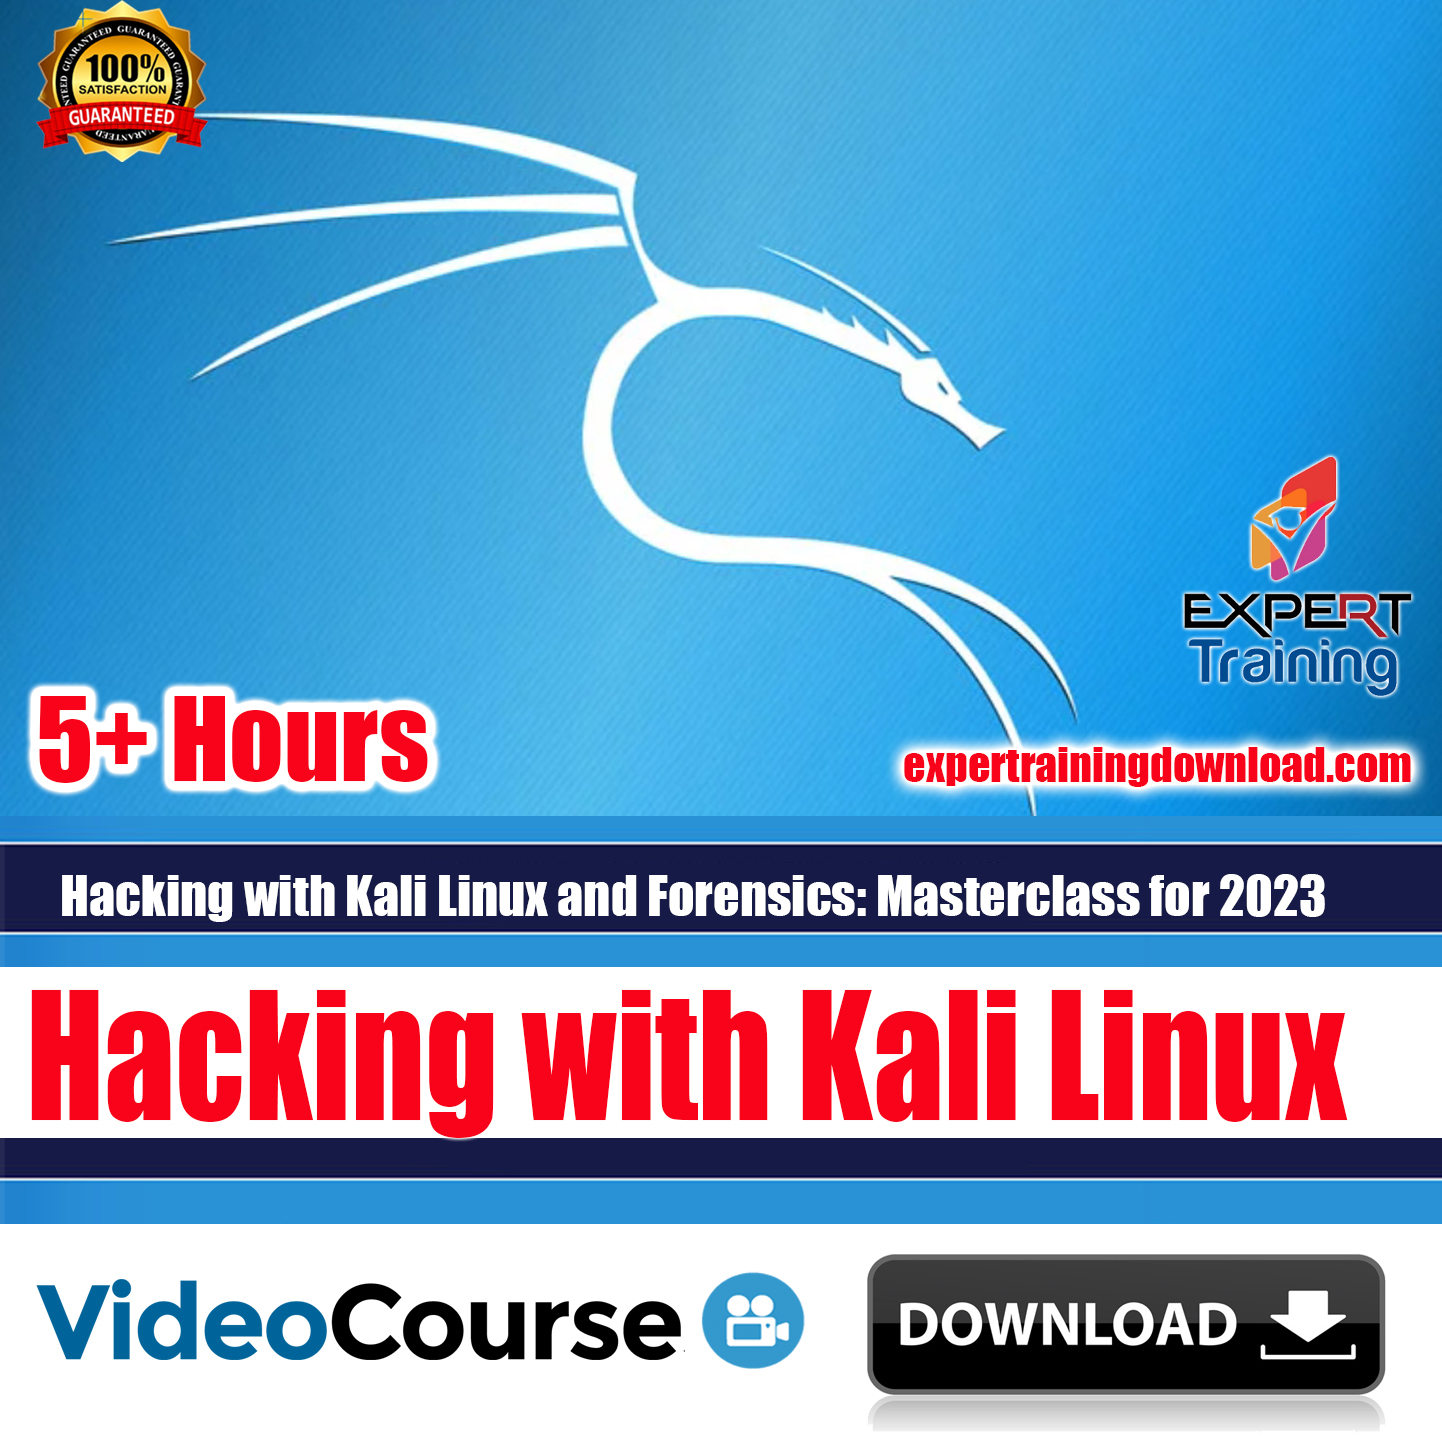 Hacking with Kali Linux and Forensics Masterclass for 2023